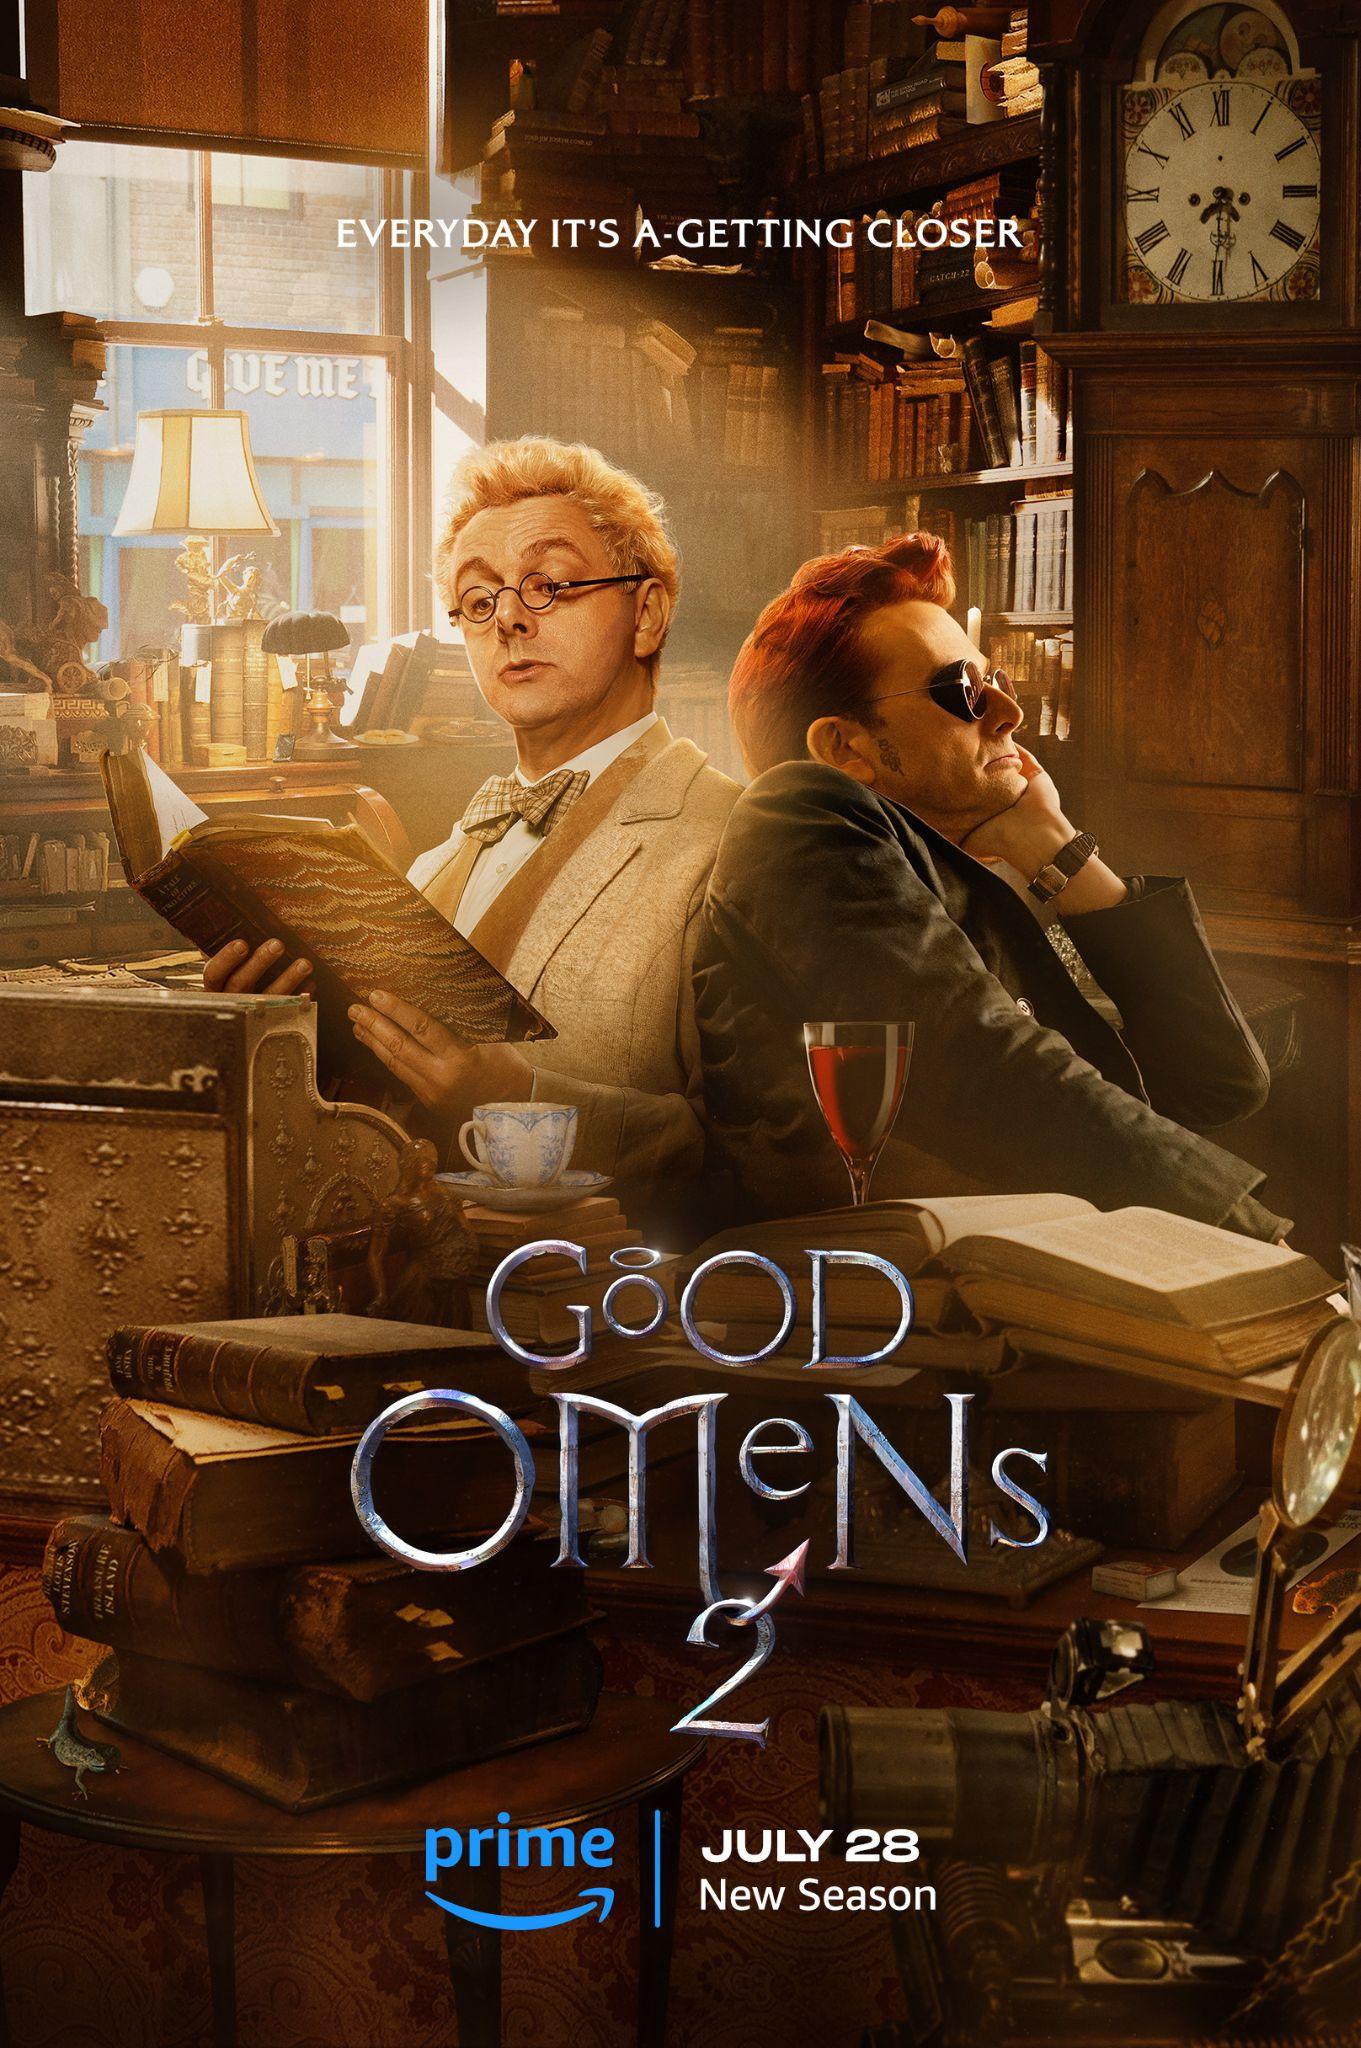 Michael Sheen dressed in white as Aziraphale holds a book, while sitting next to David Tennant dressed in black as Crowley. One has a cup of tea, the other a glass of wine.